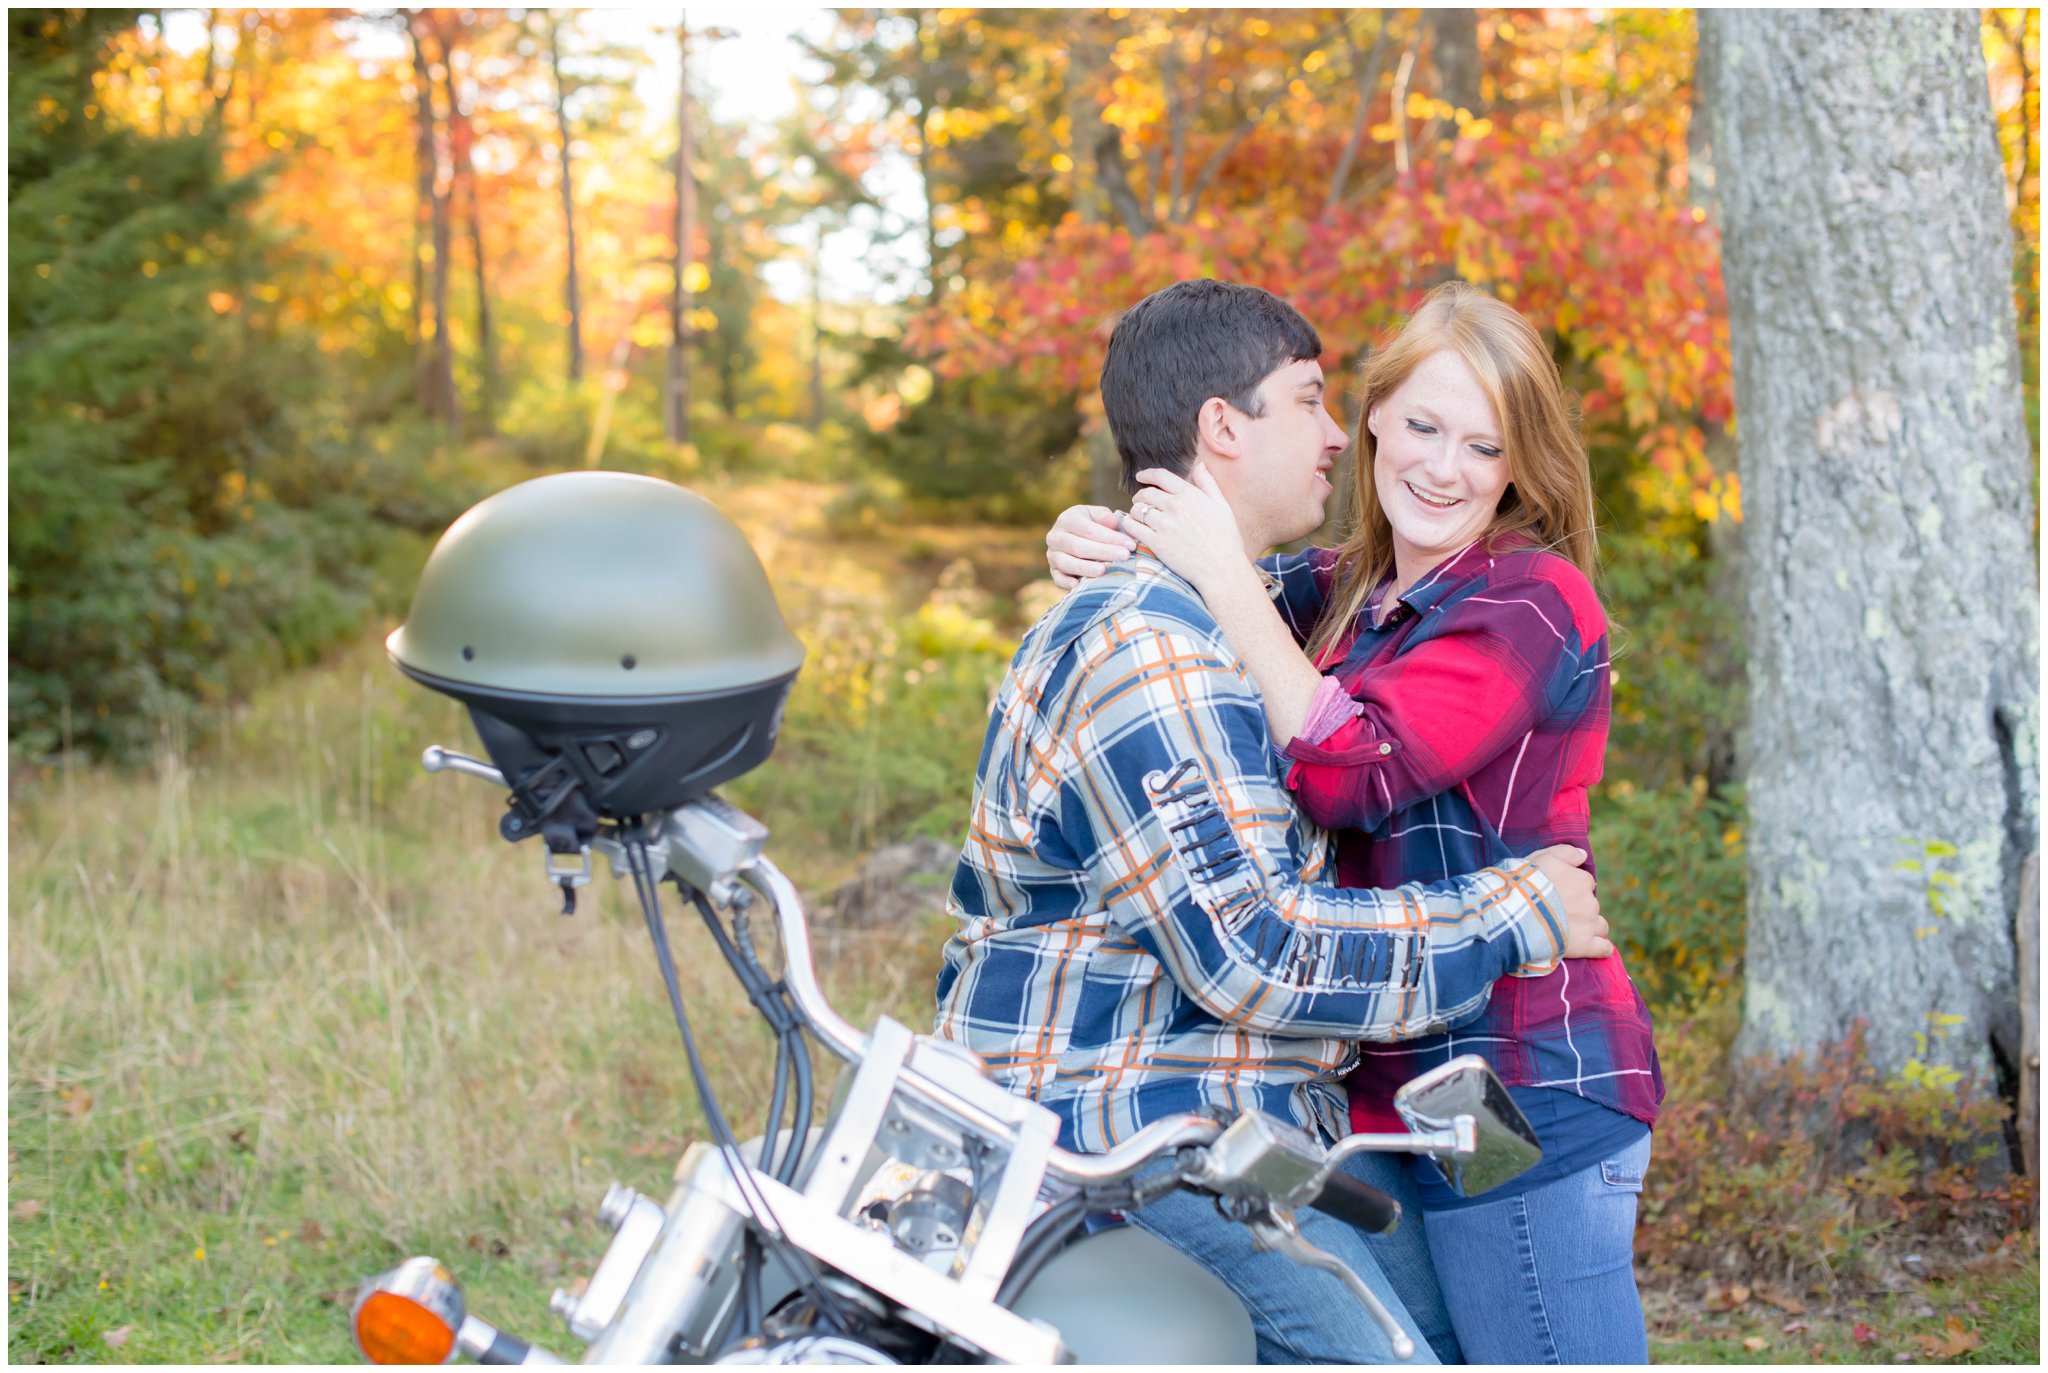 Laura Lee Photography_ Best of 2015 Engagements_0040